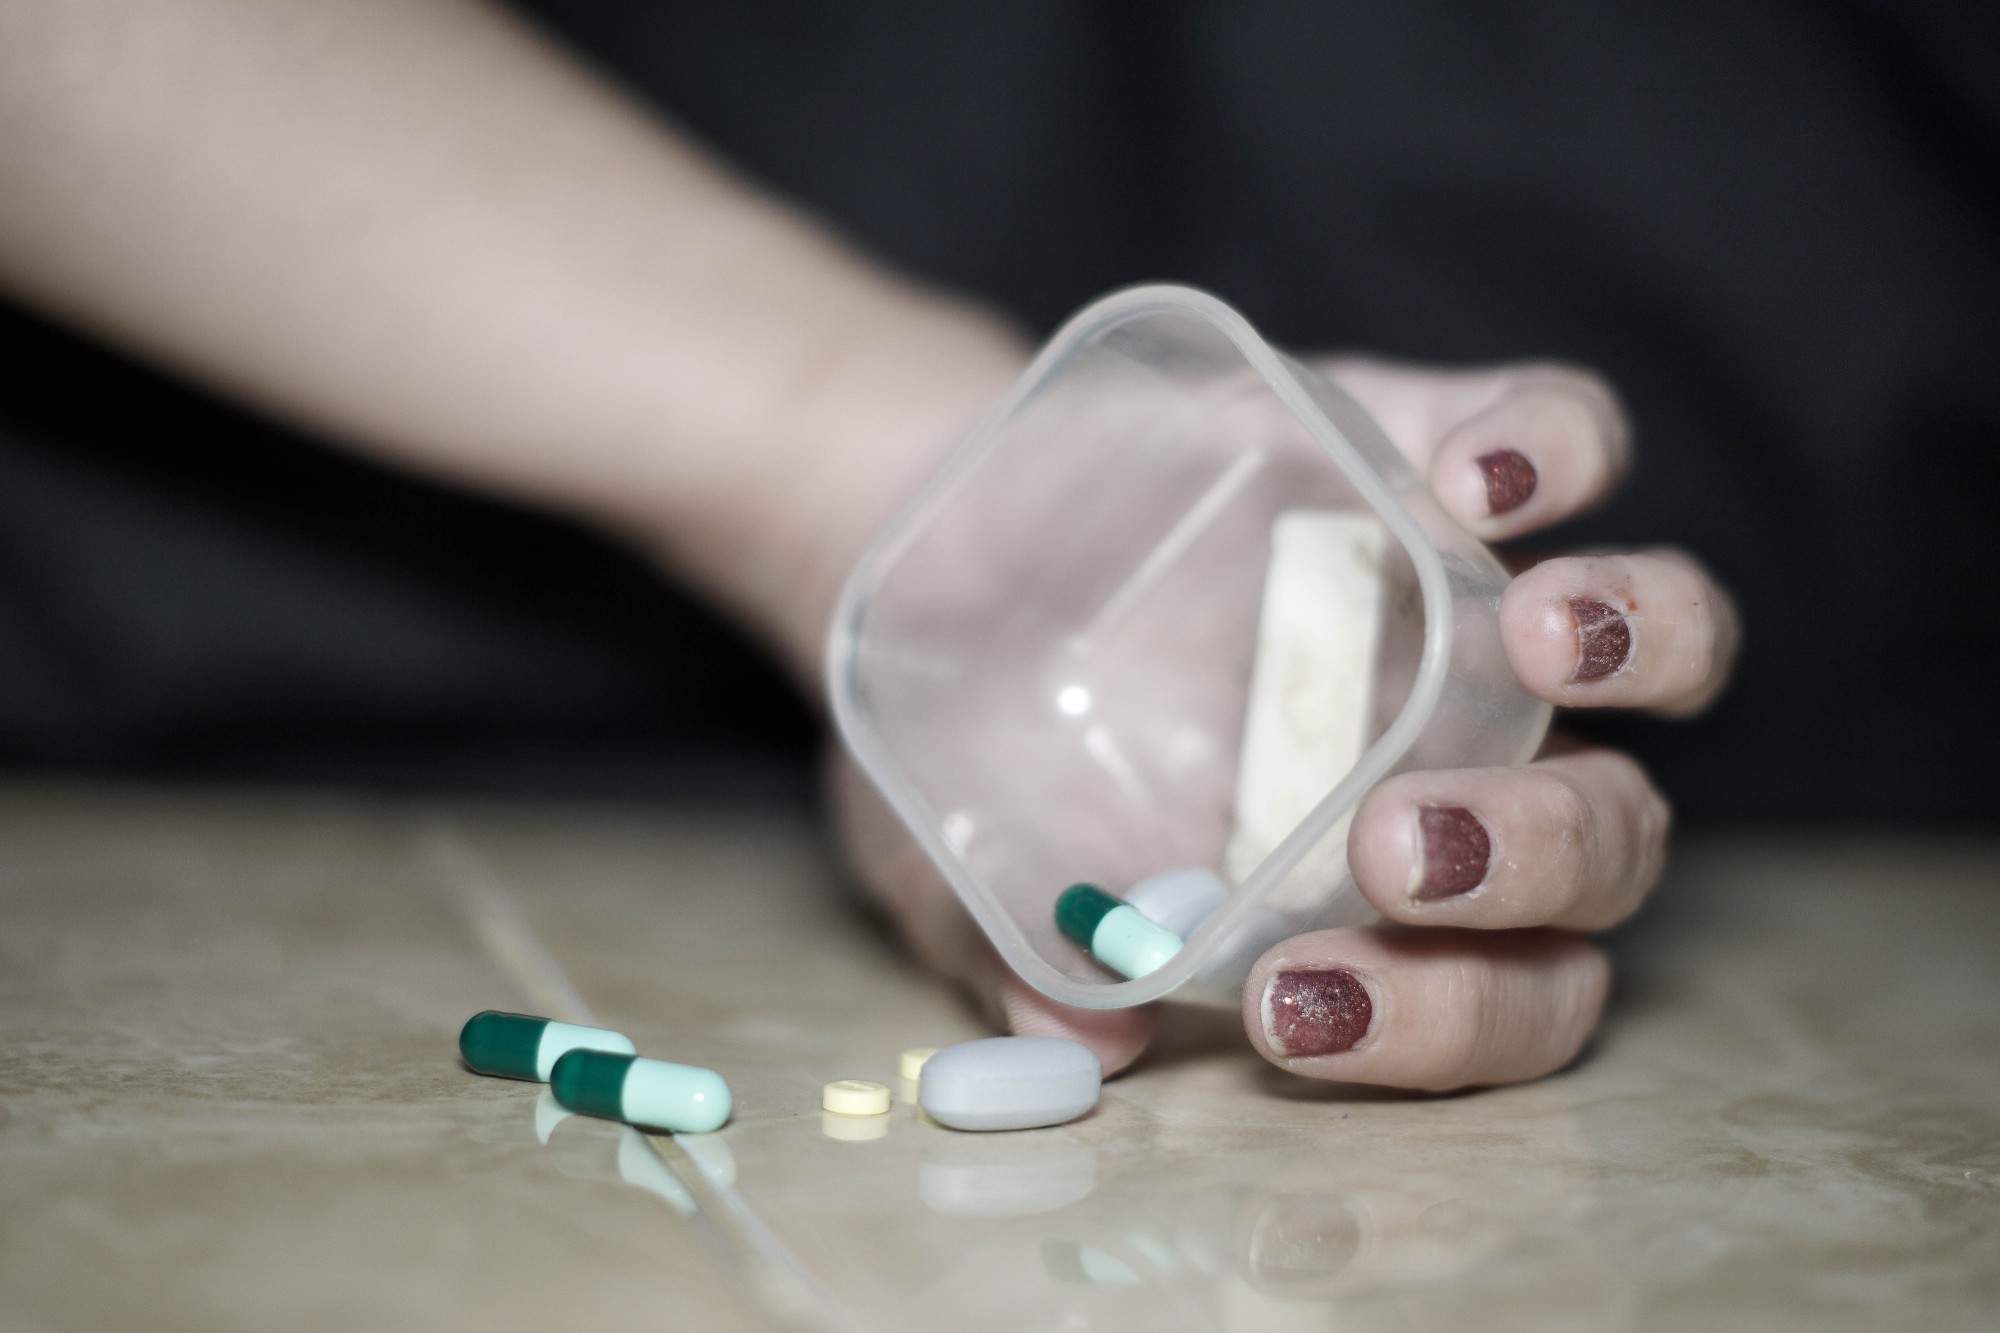 Prescription Drug Abuse: The Most Commonly Abused Drugs